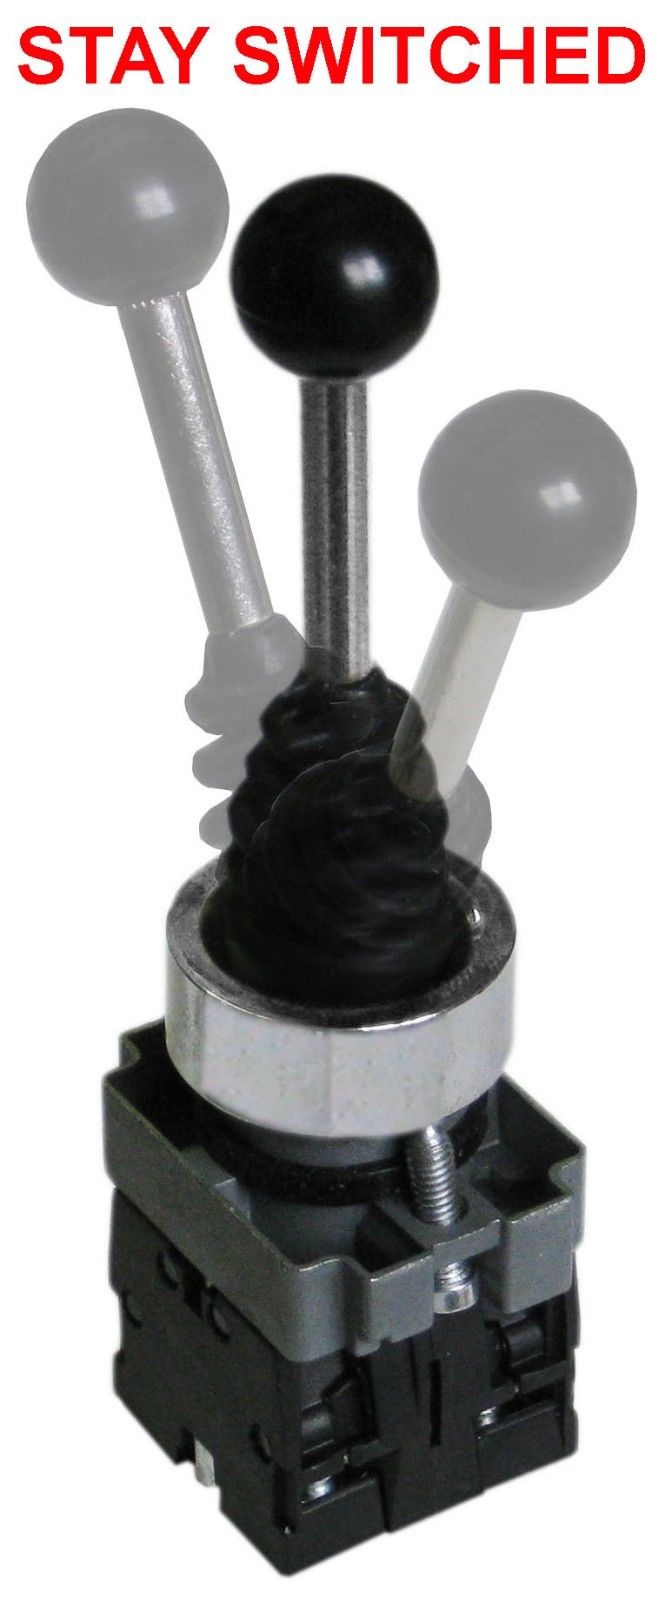 Joystick Handle 2-Button Momentary Control Switch w/ 10' Harness